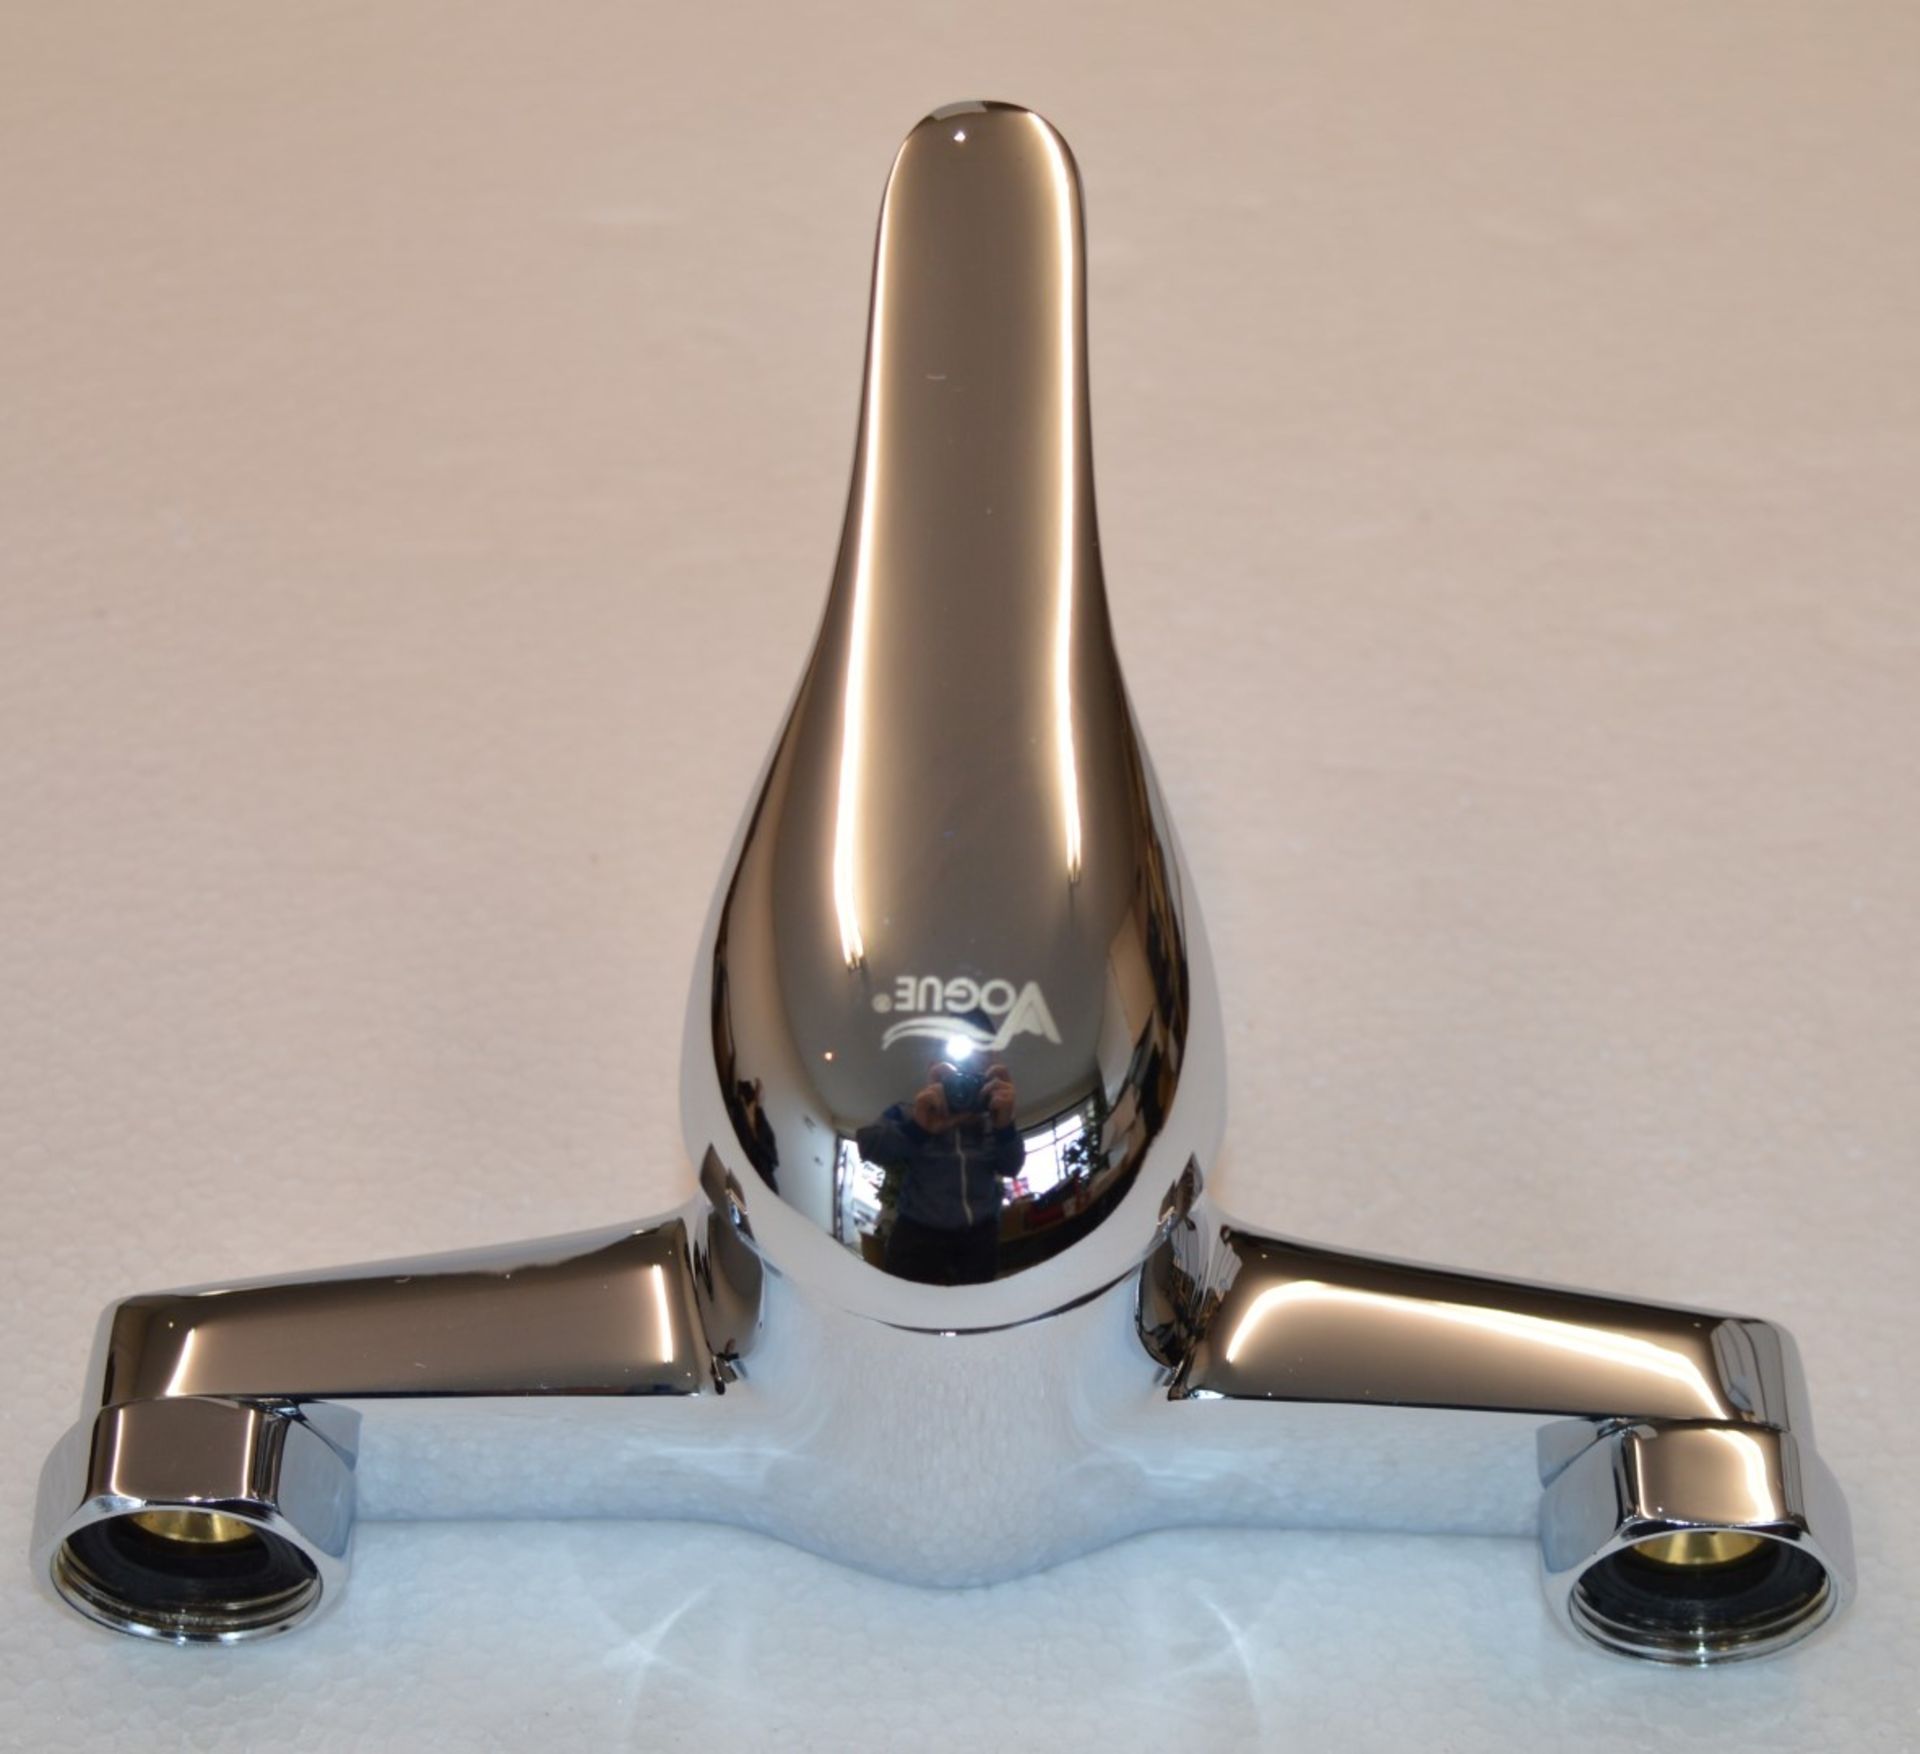 1 x Vogue Carmina Deck Mounted Bath Shower Mixer Tap - Includes Bath Mixer Tap, Shower Head and - Image 5 of 8